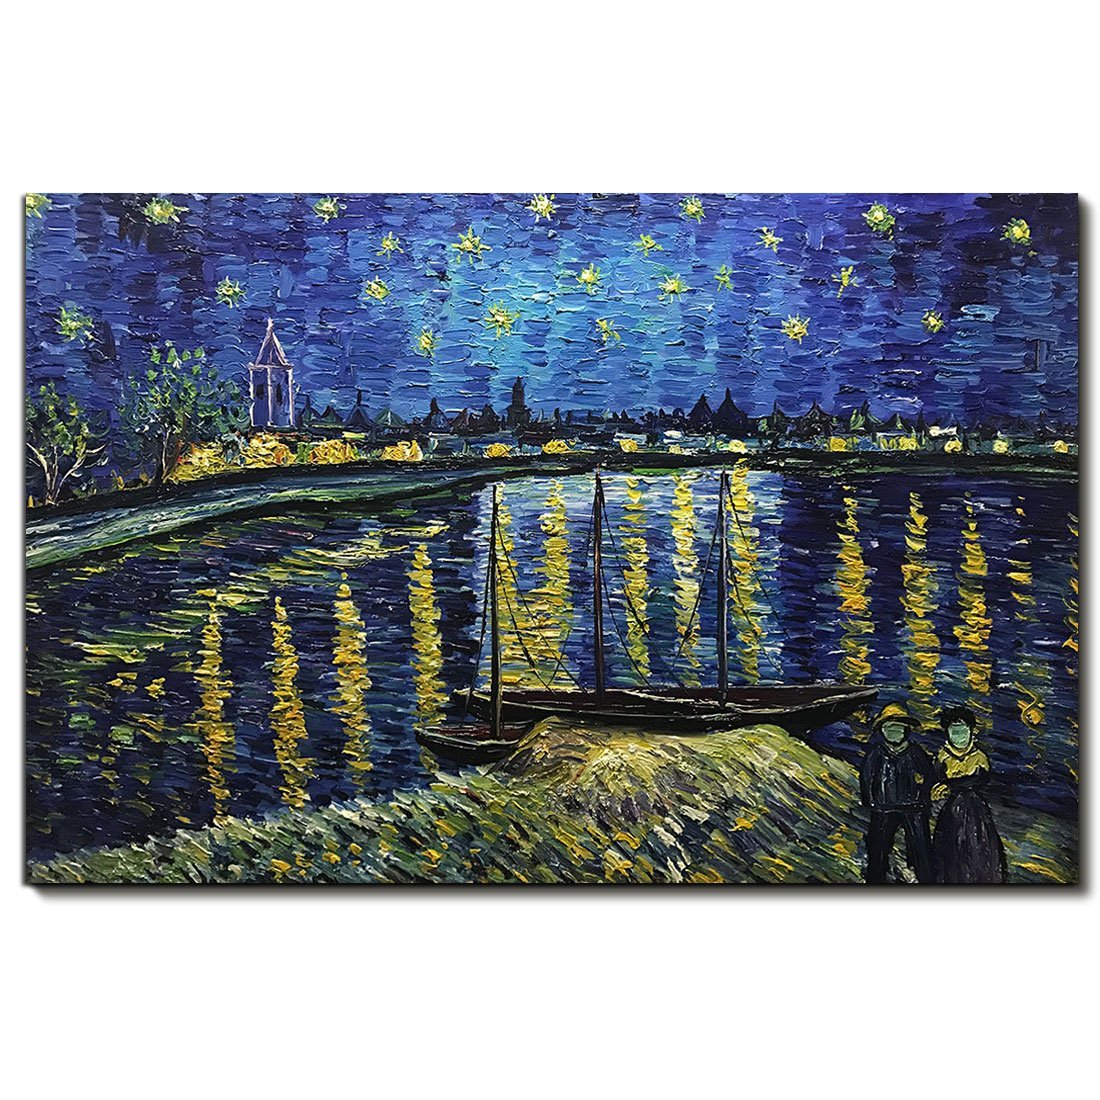 Starry Night Over the Rhone by Van Gogh Famous Oil Paintings Drop shipping